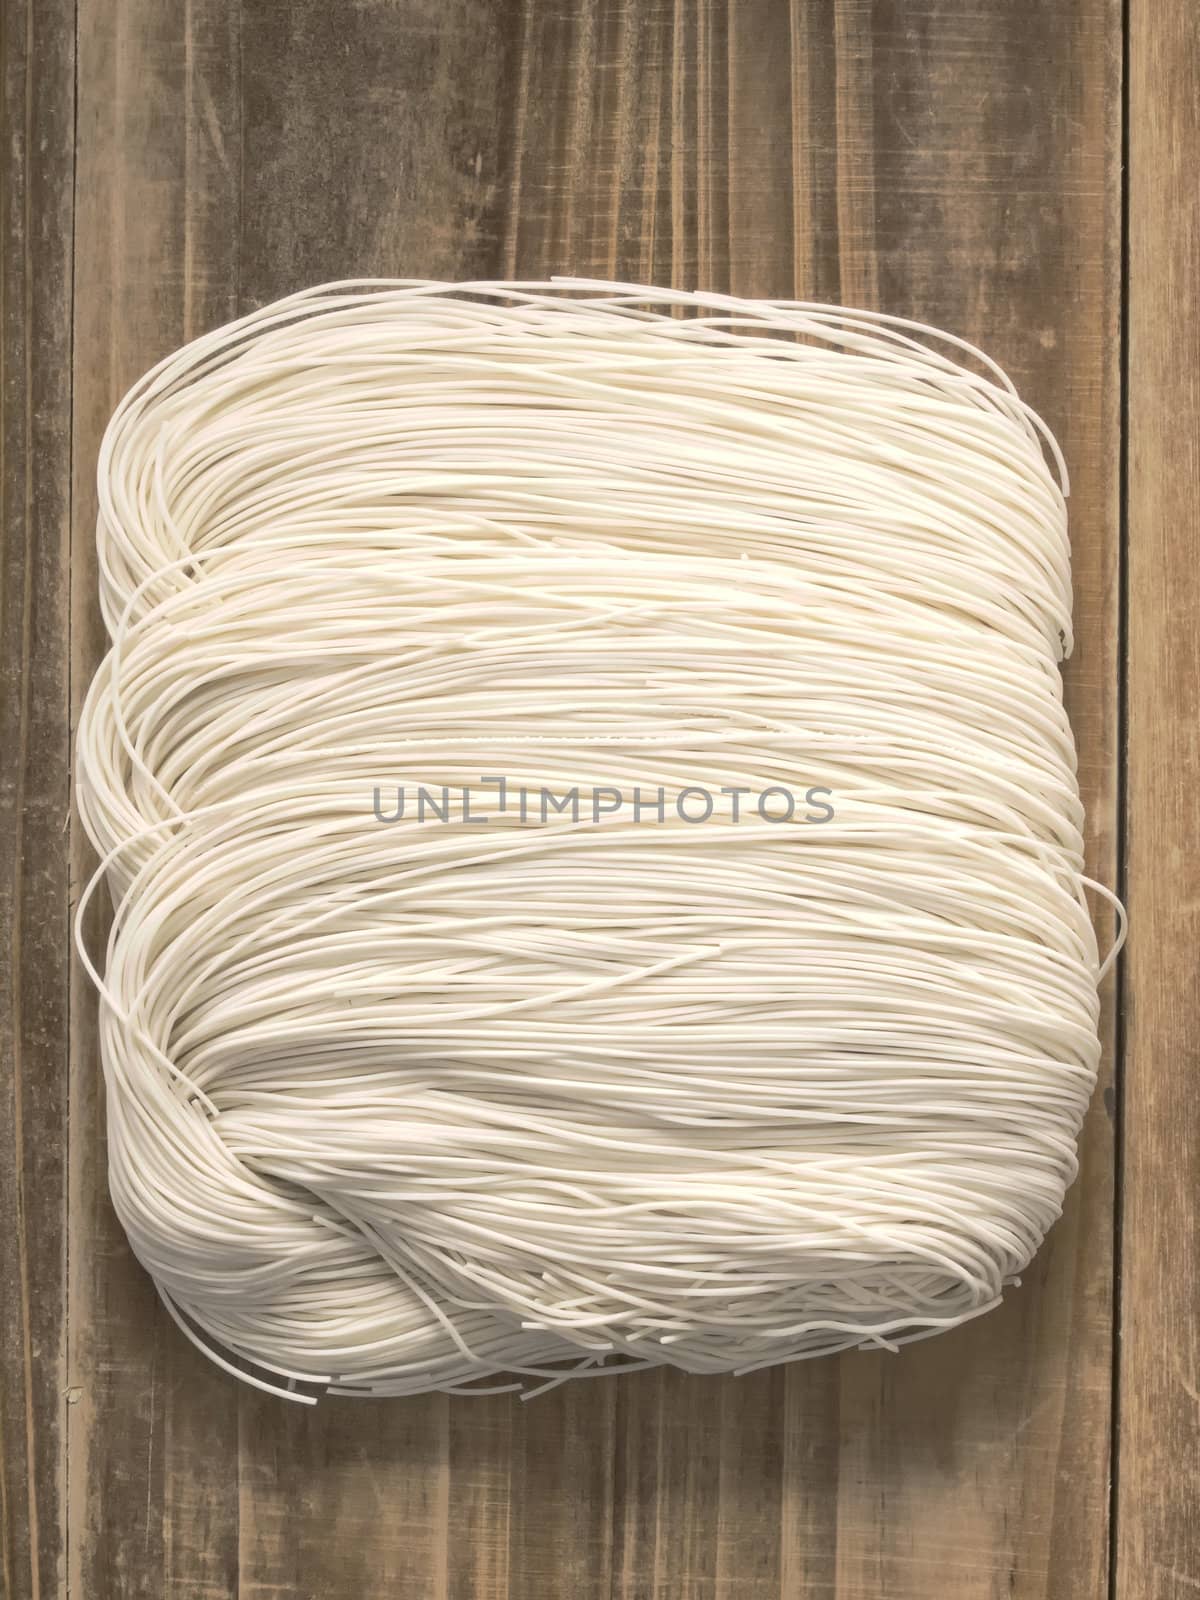 chinese wheat flour noodles by zkruger